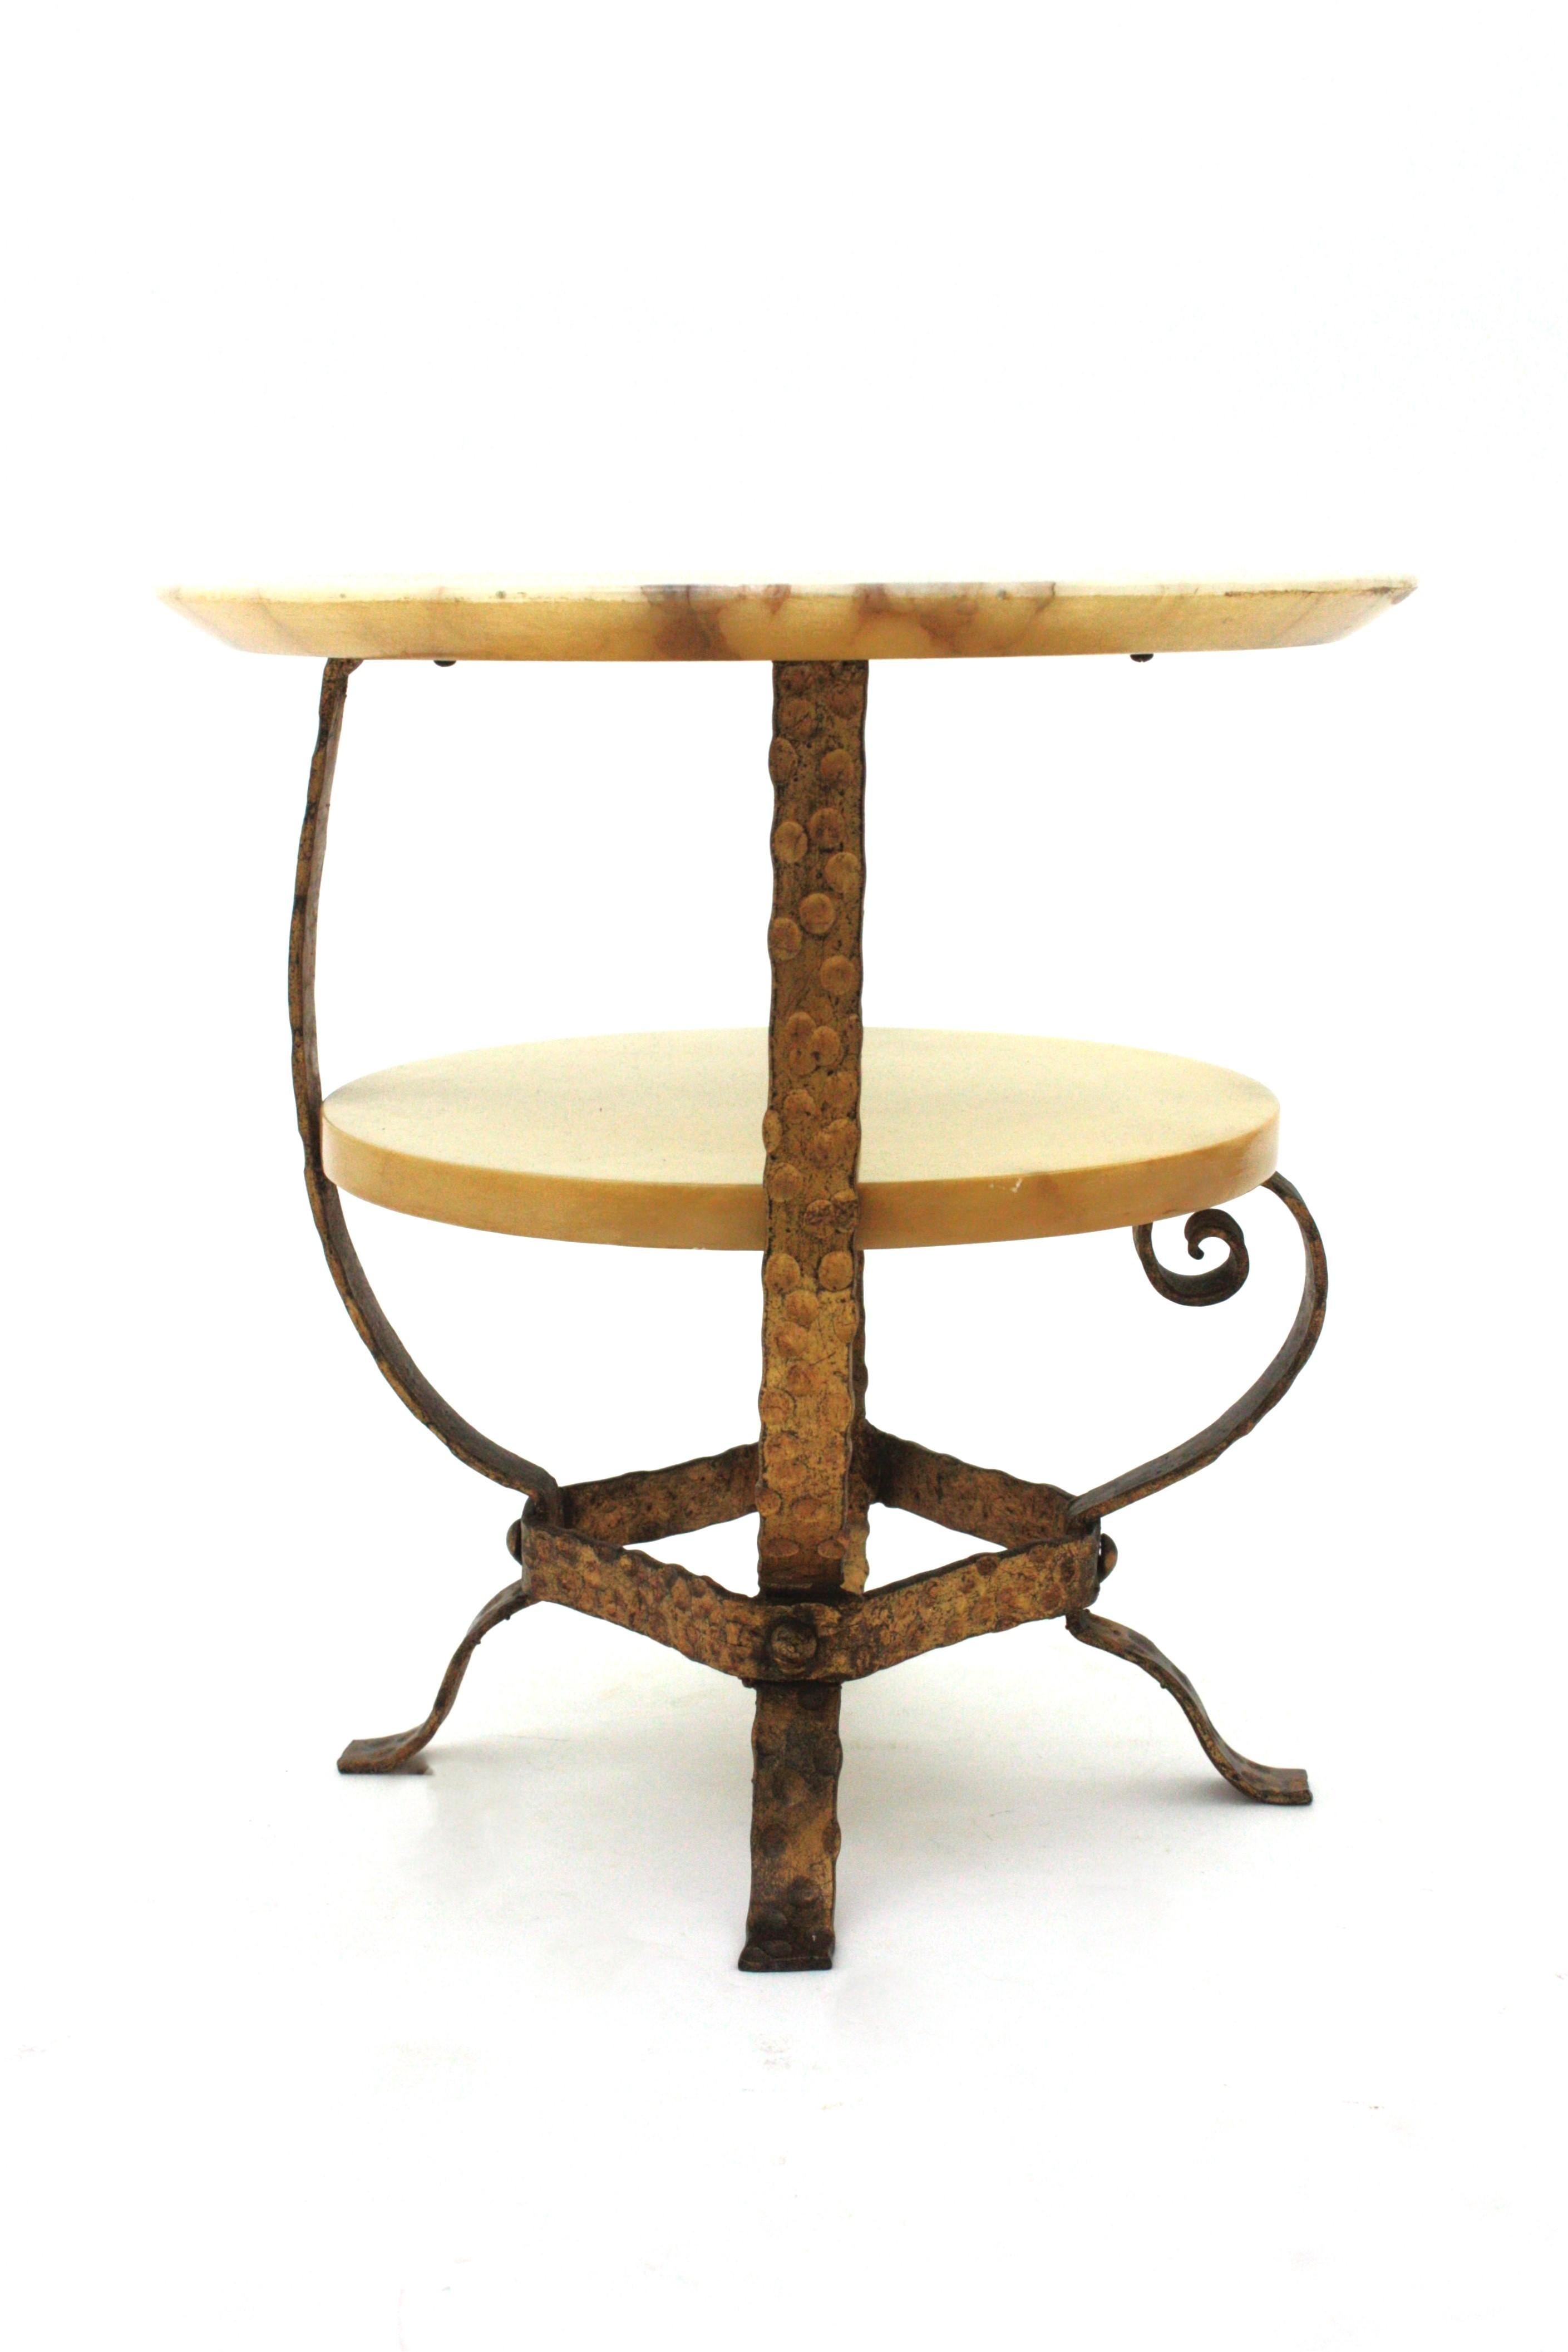 20th Century Spanish Coffee Table or Side Table, Alabaster & Gilt Iron